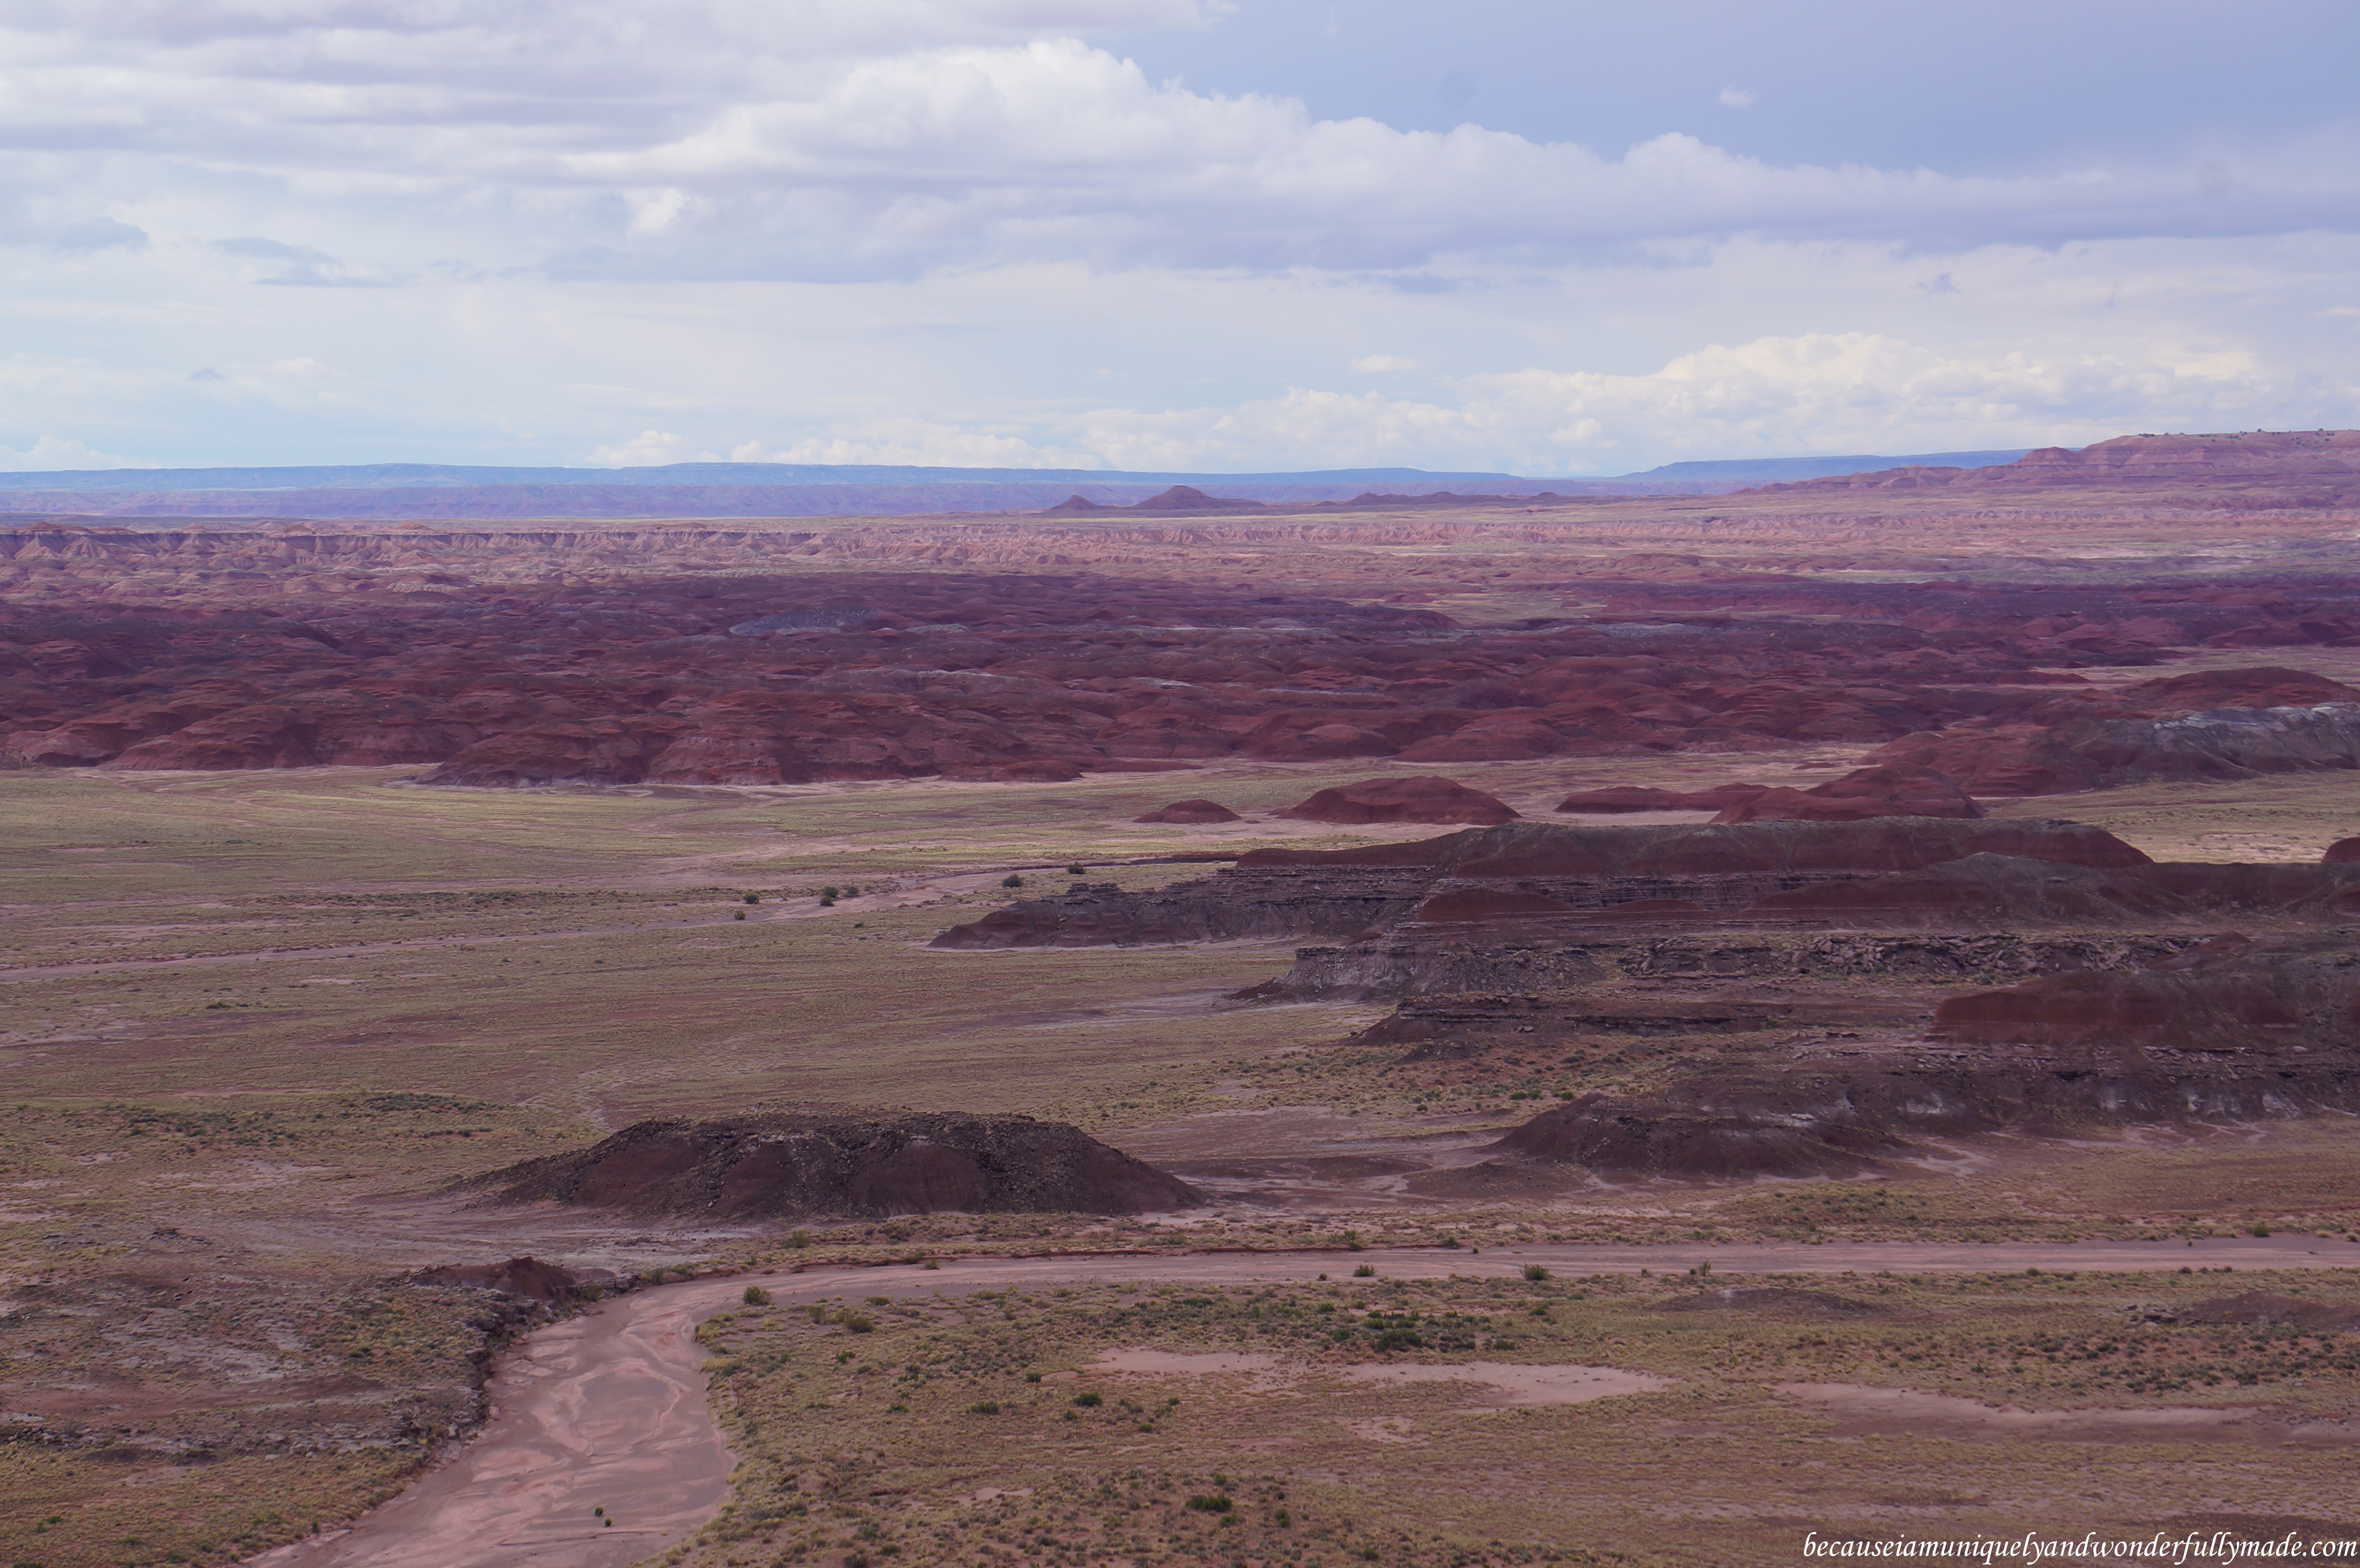 The gorgeous Painted Desert as seen from Pintado Point in Petrified Forest National Park in Arizona.